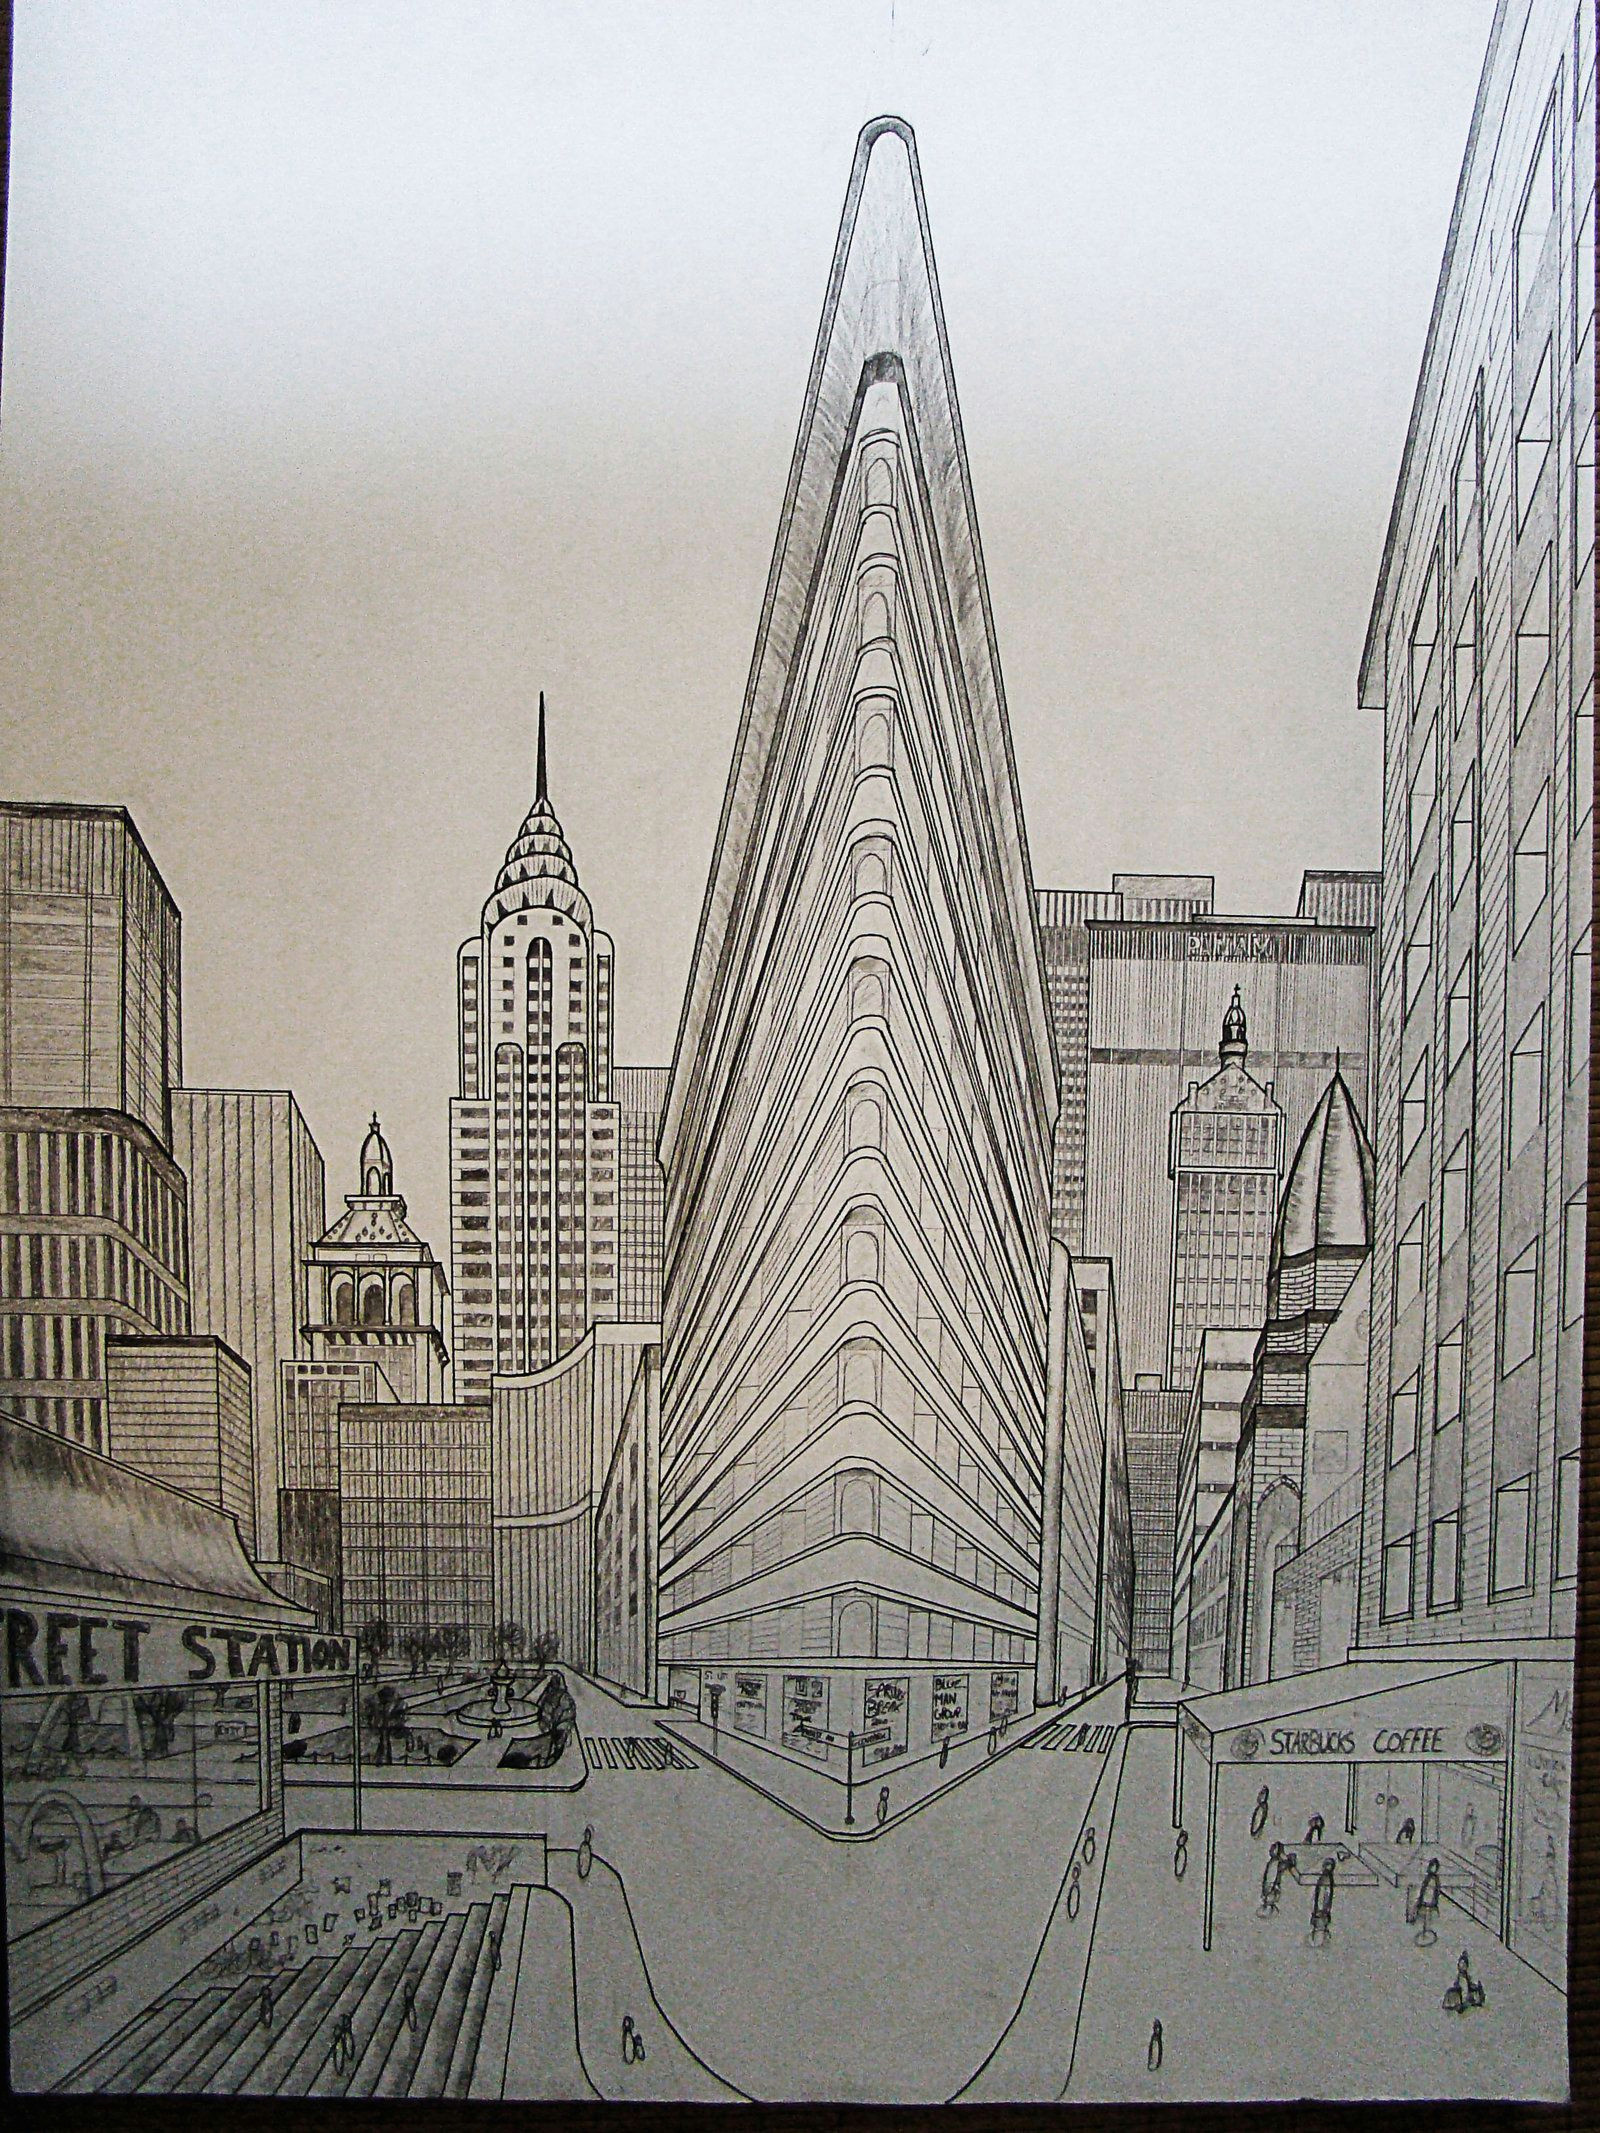 Perspective Drawing Eye View Double Perspective Drawing Ny by Nilsgermain On Deviantart Art